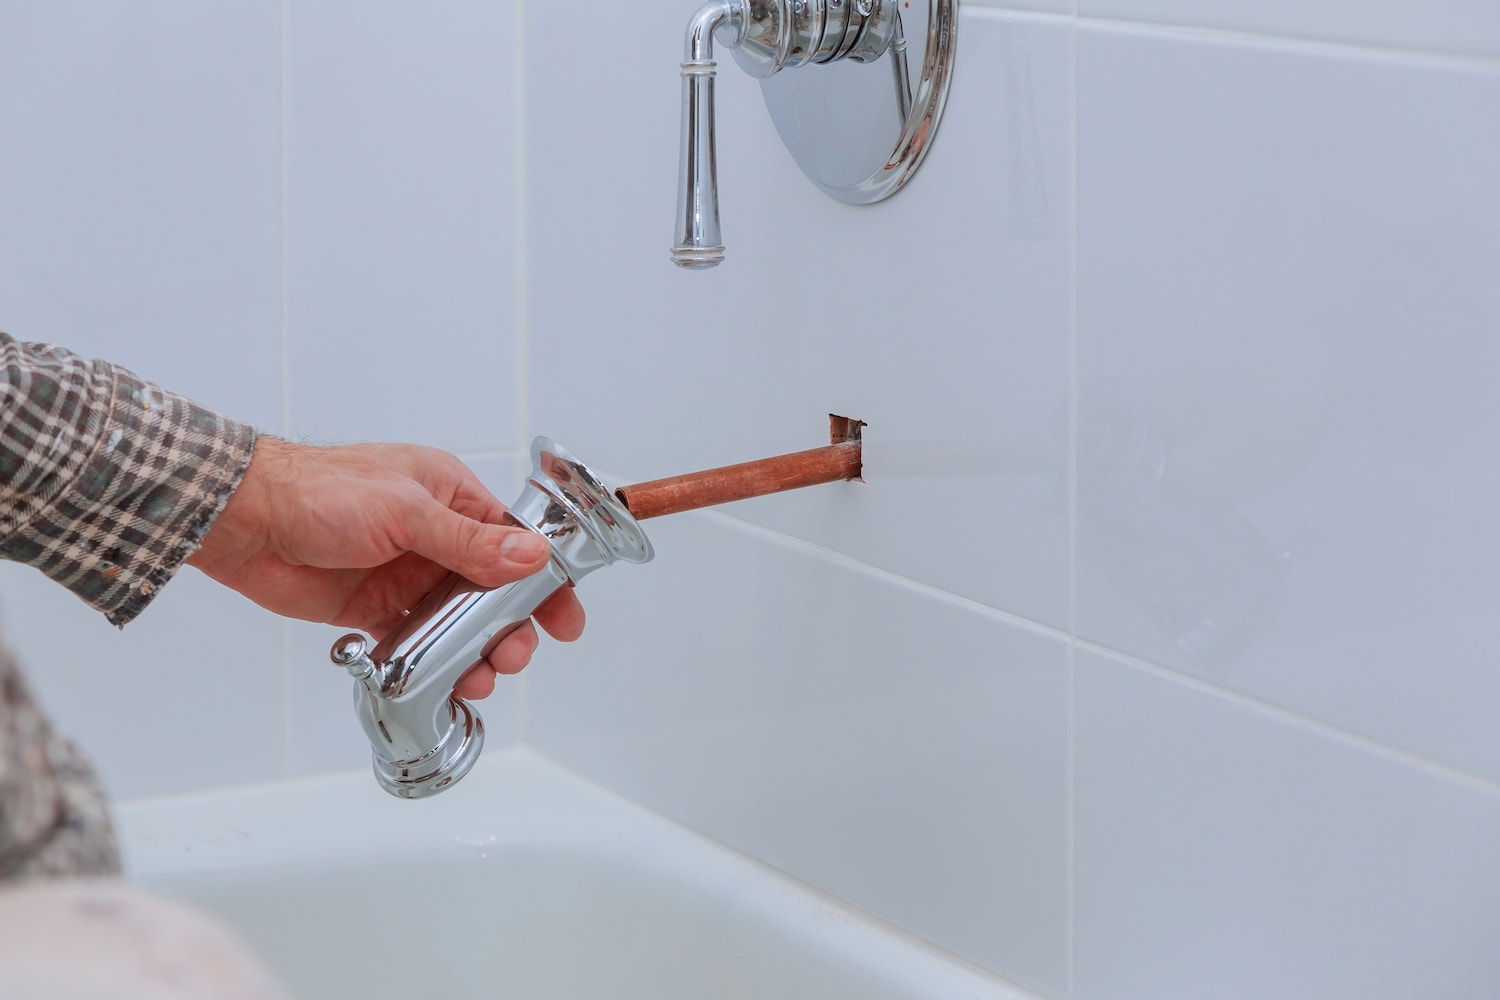 How To Repair Your Tub And Shower Faucet To Stop The Dripping